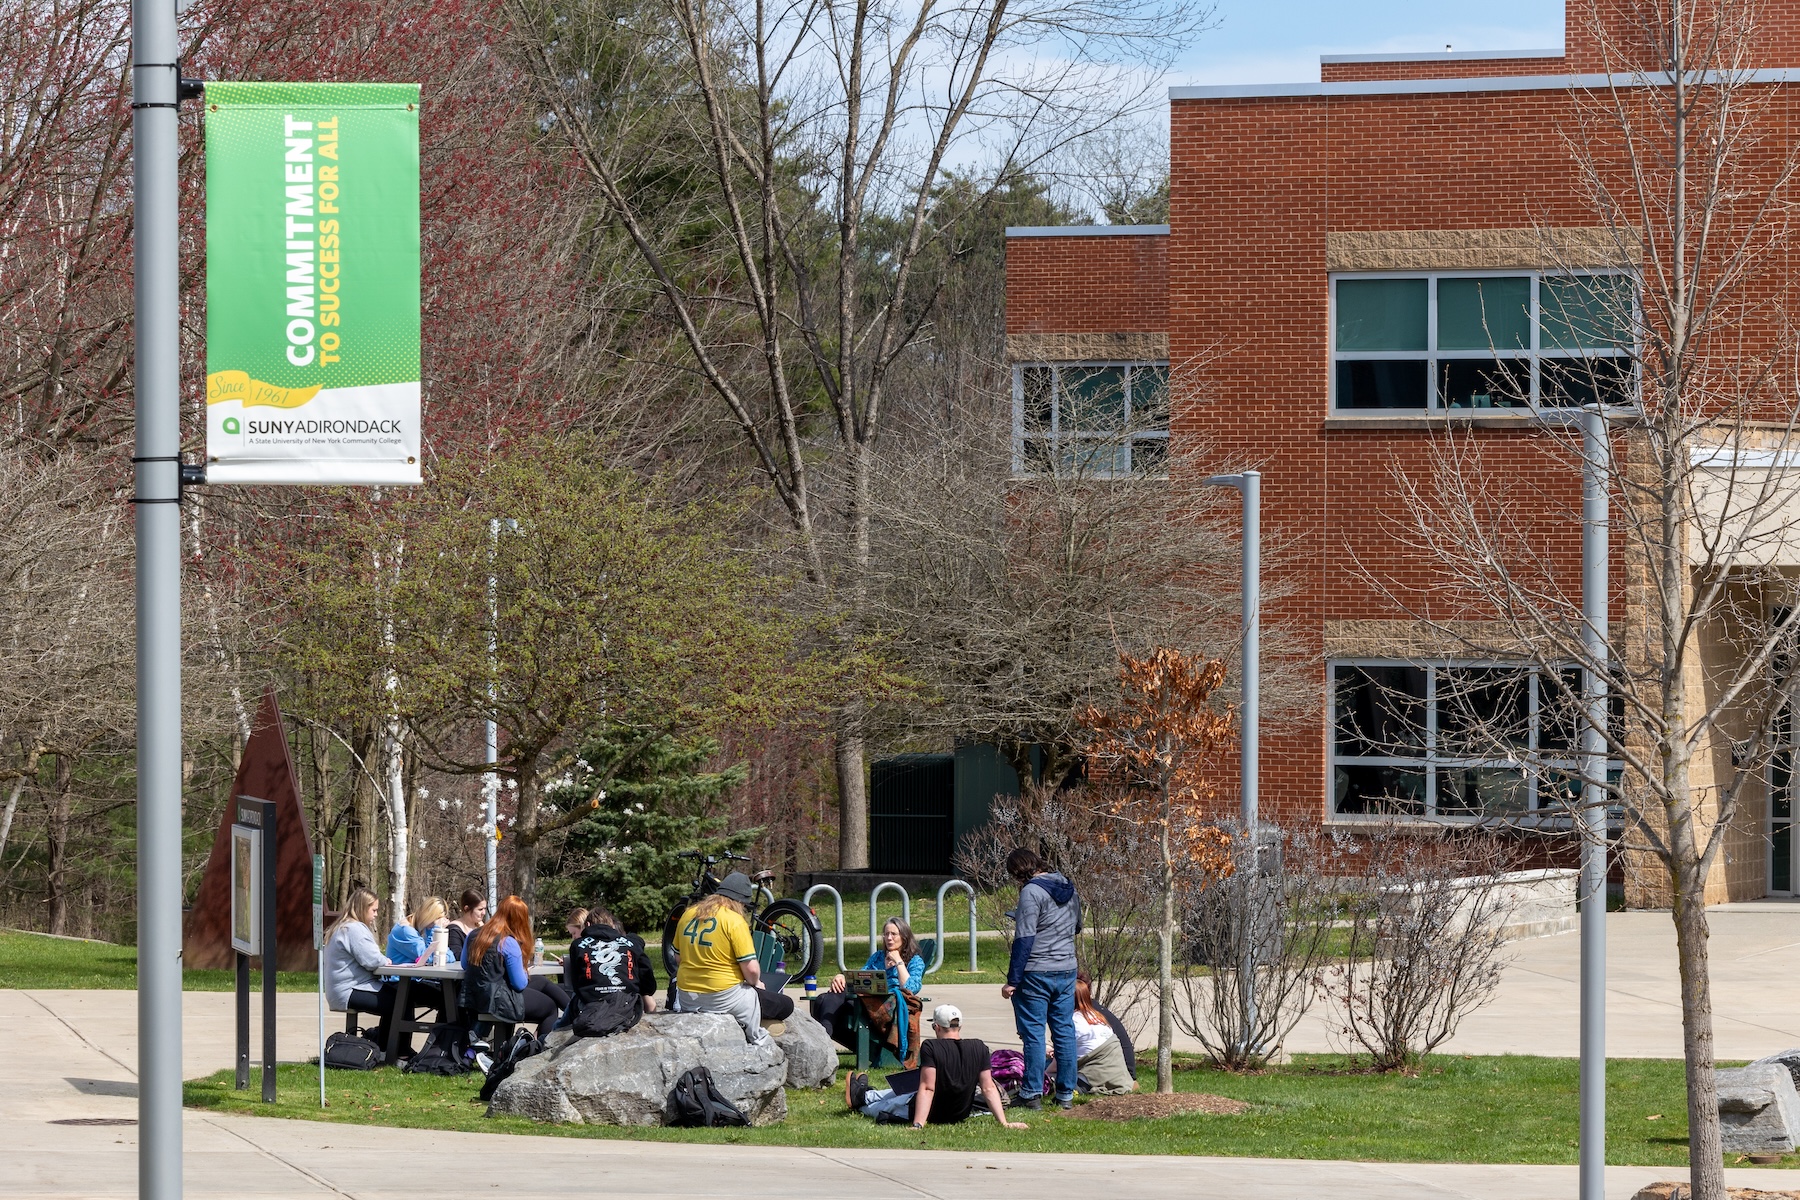 A group of students are seen outside on SUNY Adirondack's Queensbury campus